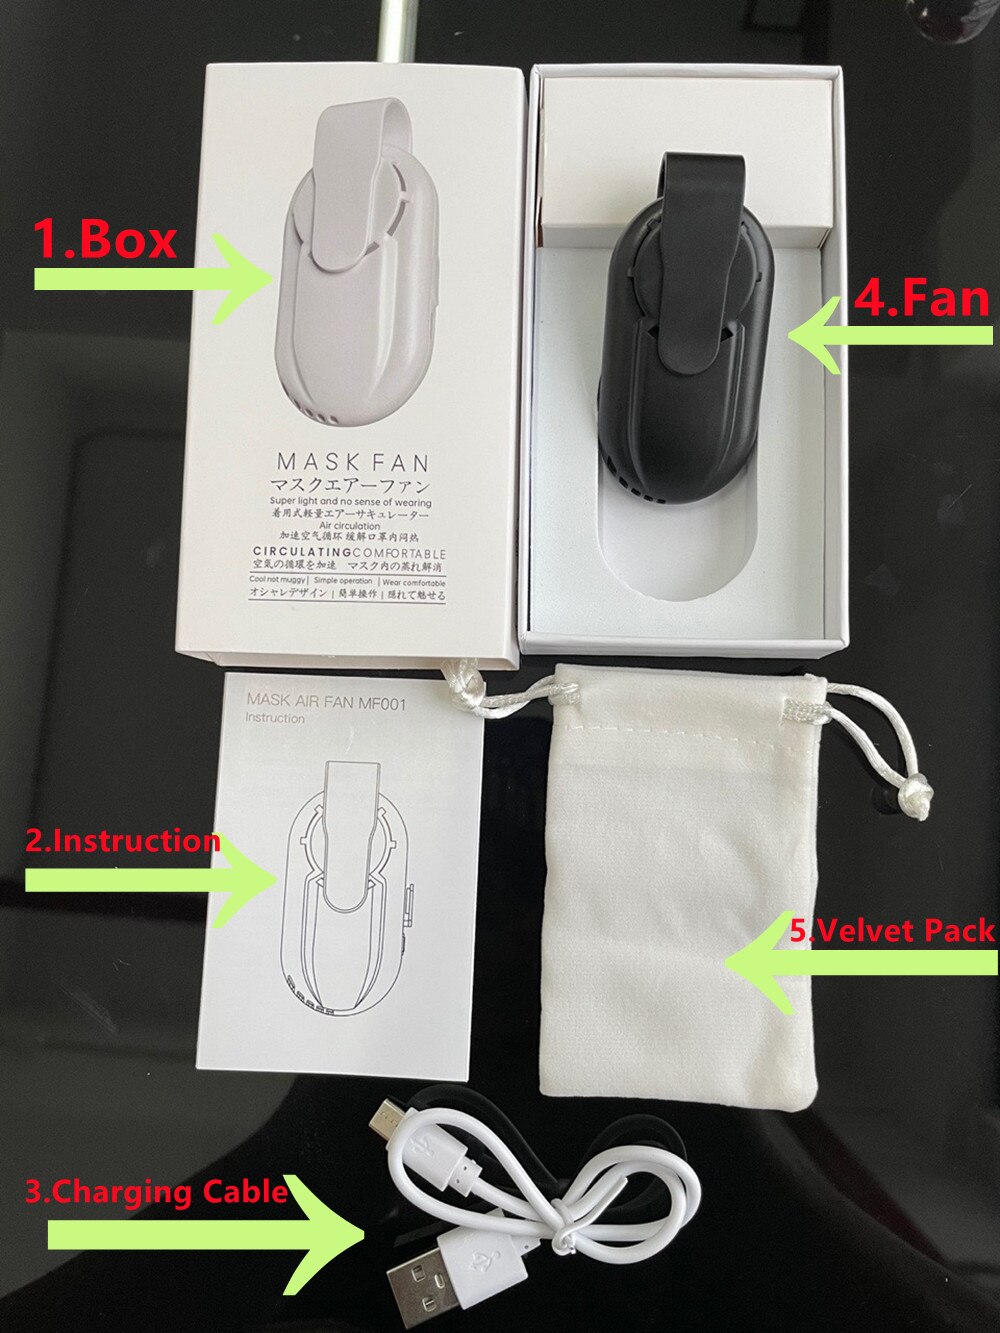 New Face Mask Mini Fan Anti-Haze Children Adult Air Purifying Portable USB Rechargeable Clip-On Speed Adjust Smart Facial Fans